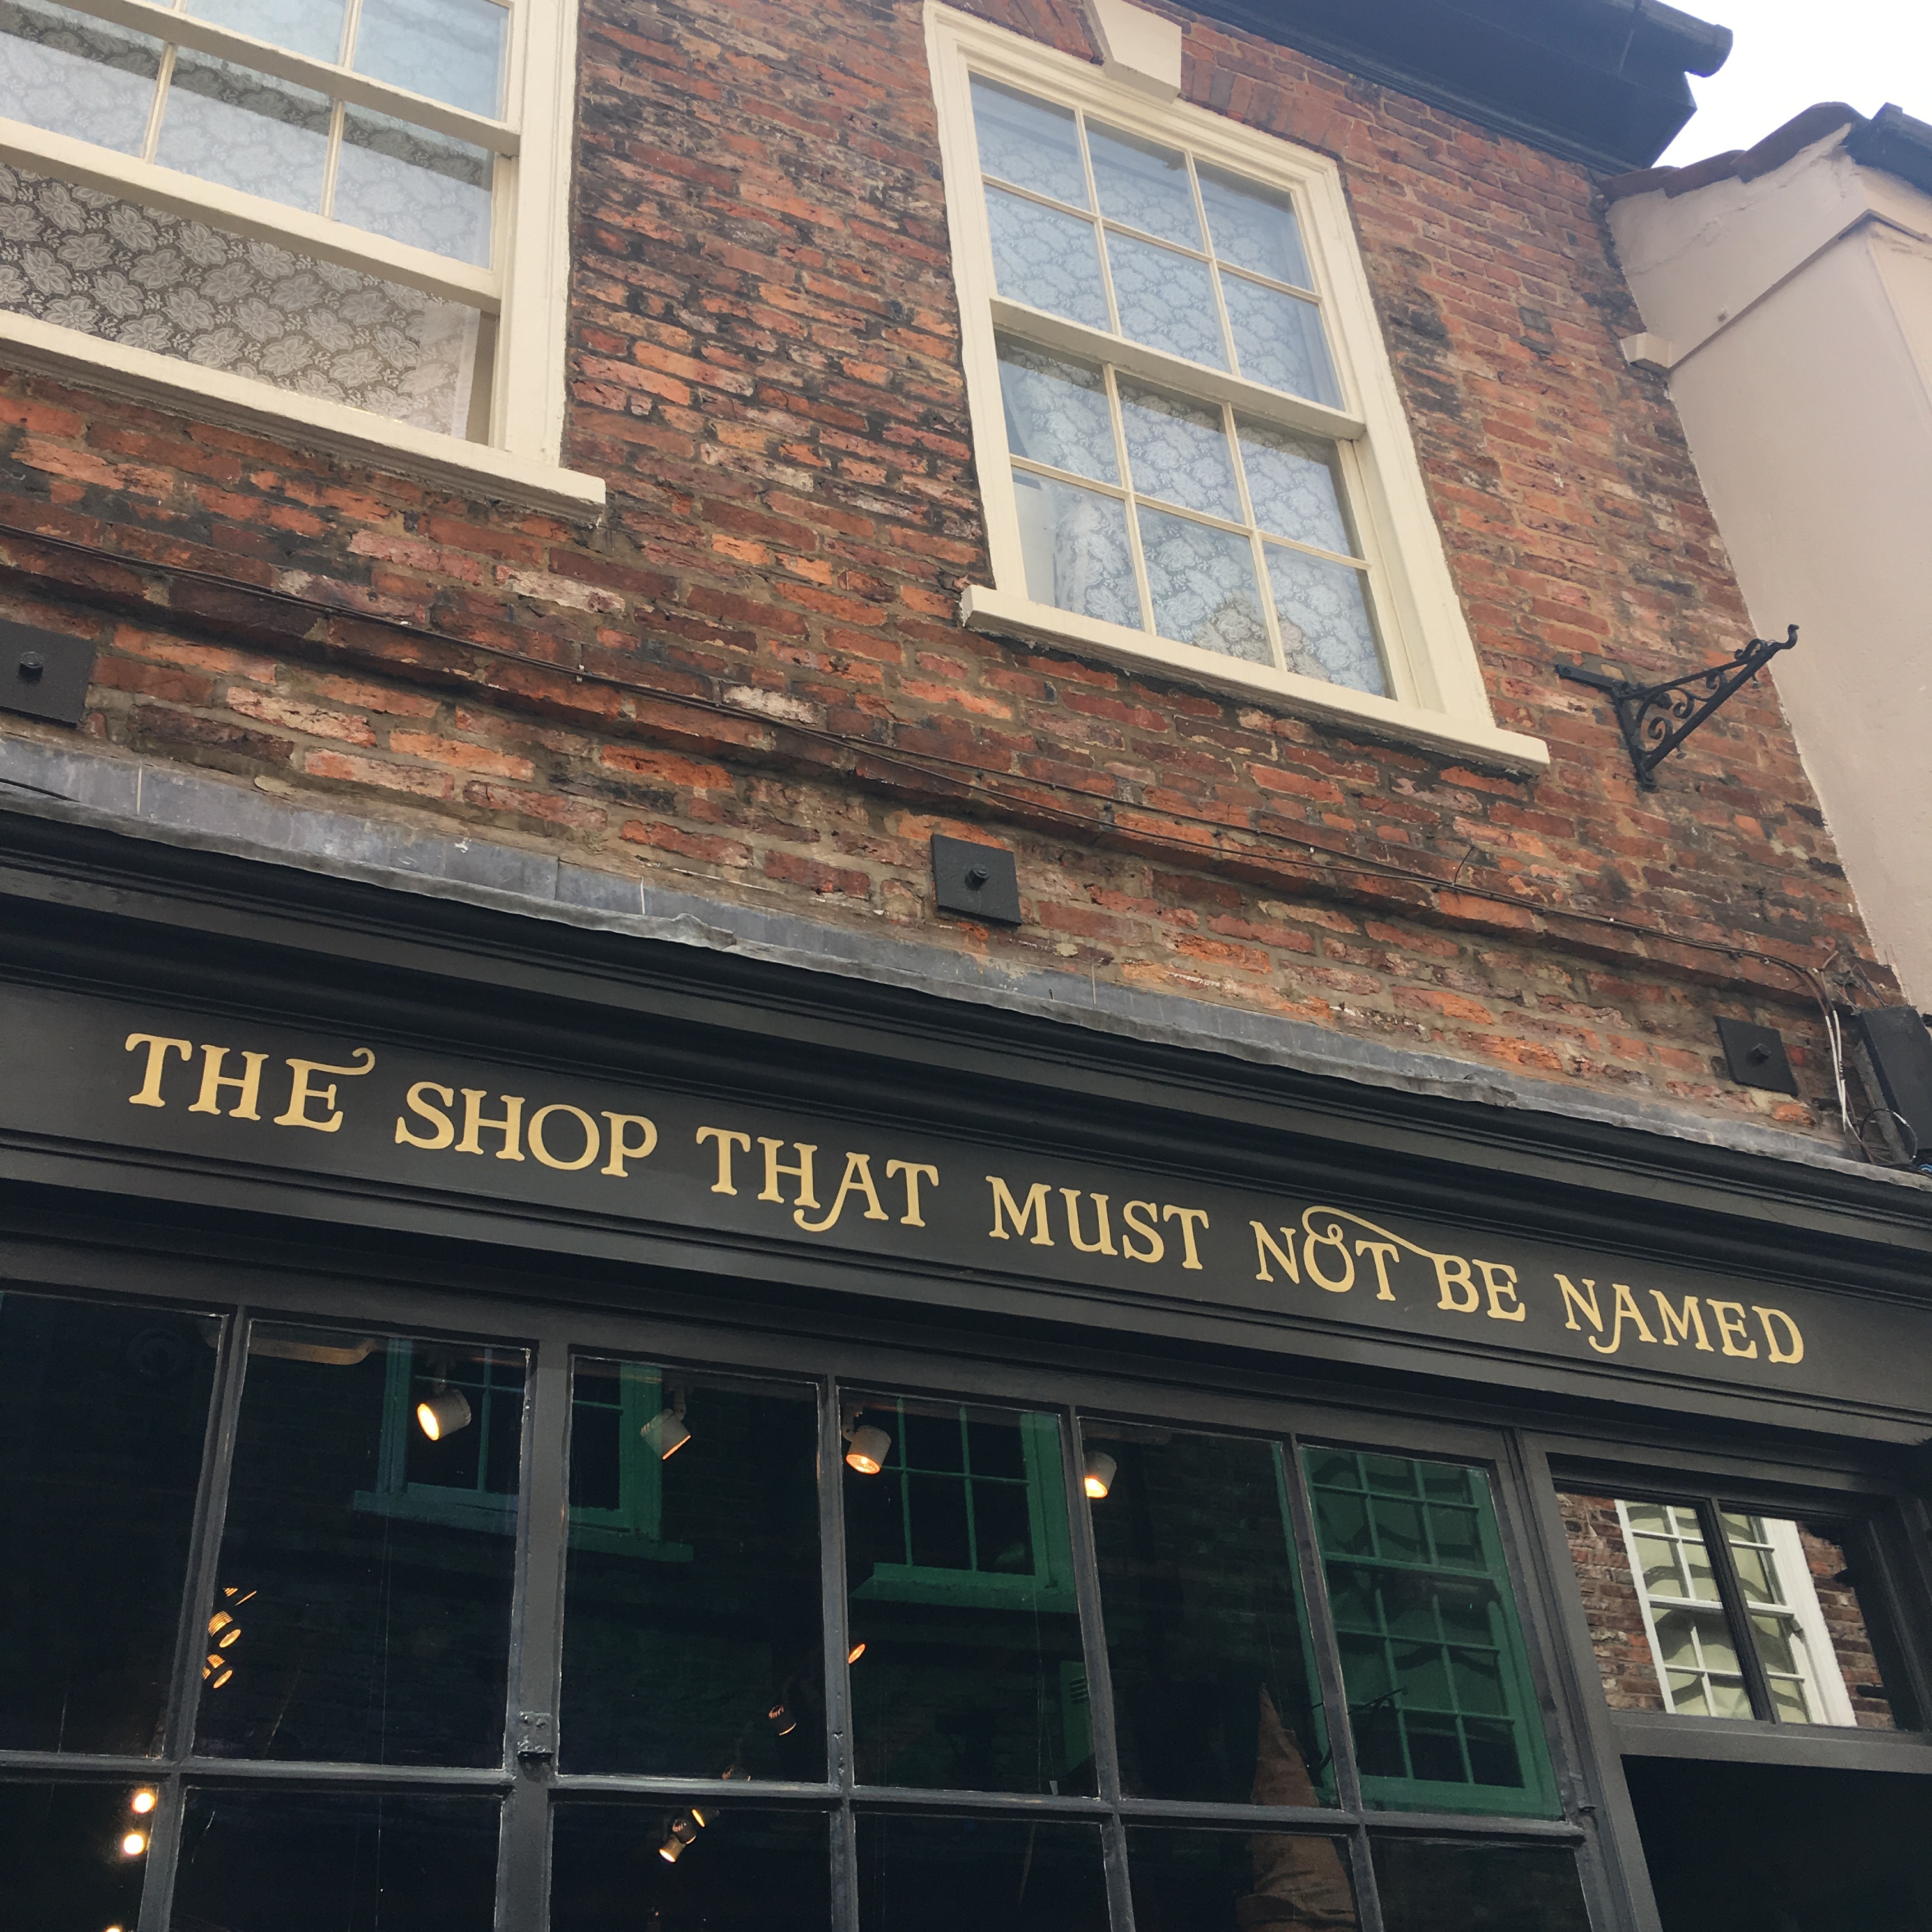 He who must not be named in York